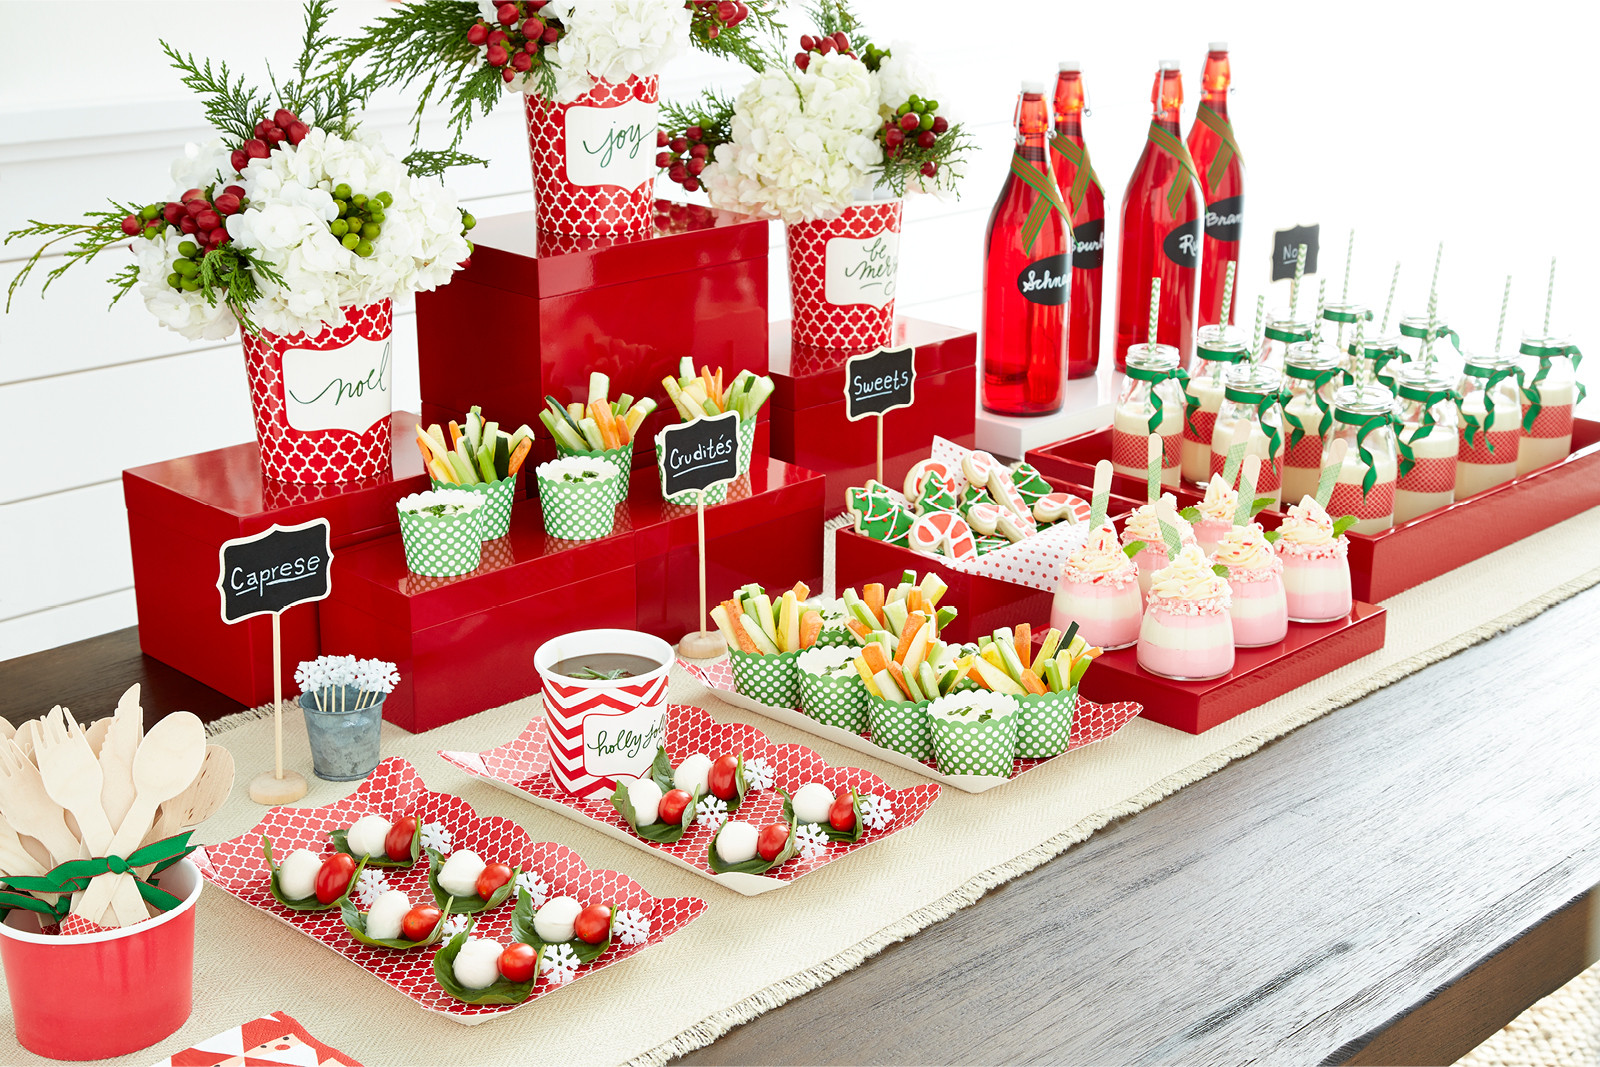 Pinterest Christmas Party Ideas
 A Very Merry Table of Treats